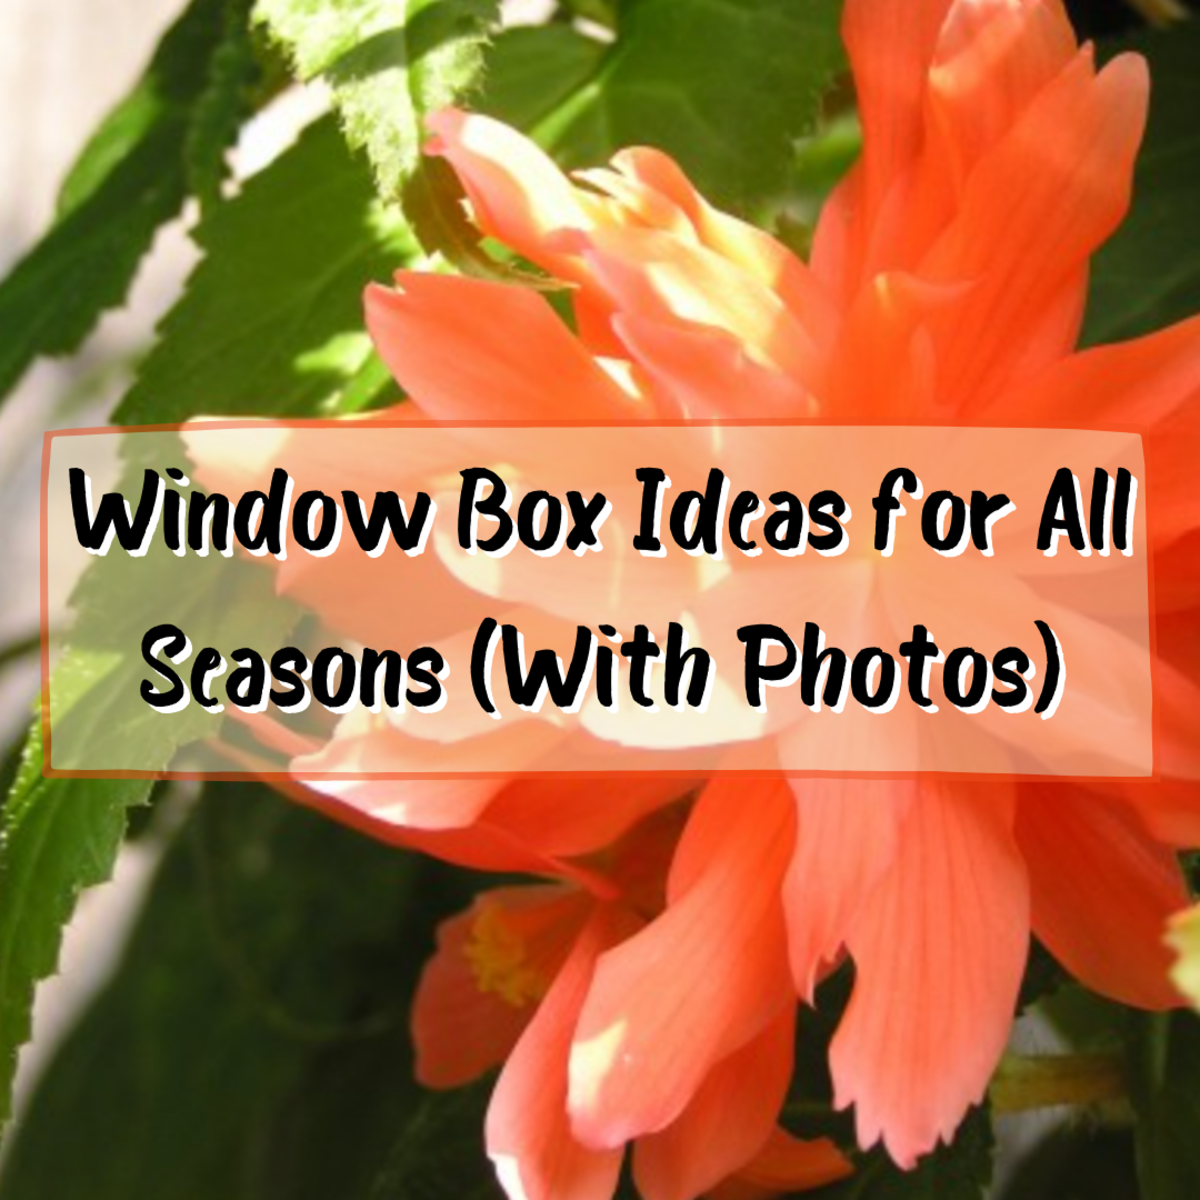 Read on for inspiration to create the perfect window box for any season. You'll find window box ideas galore!